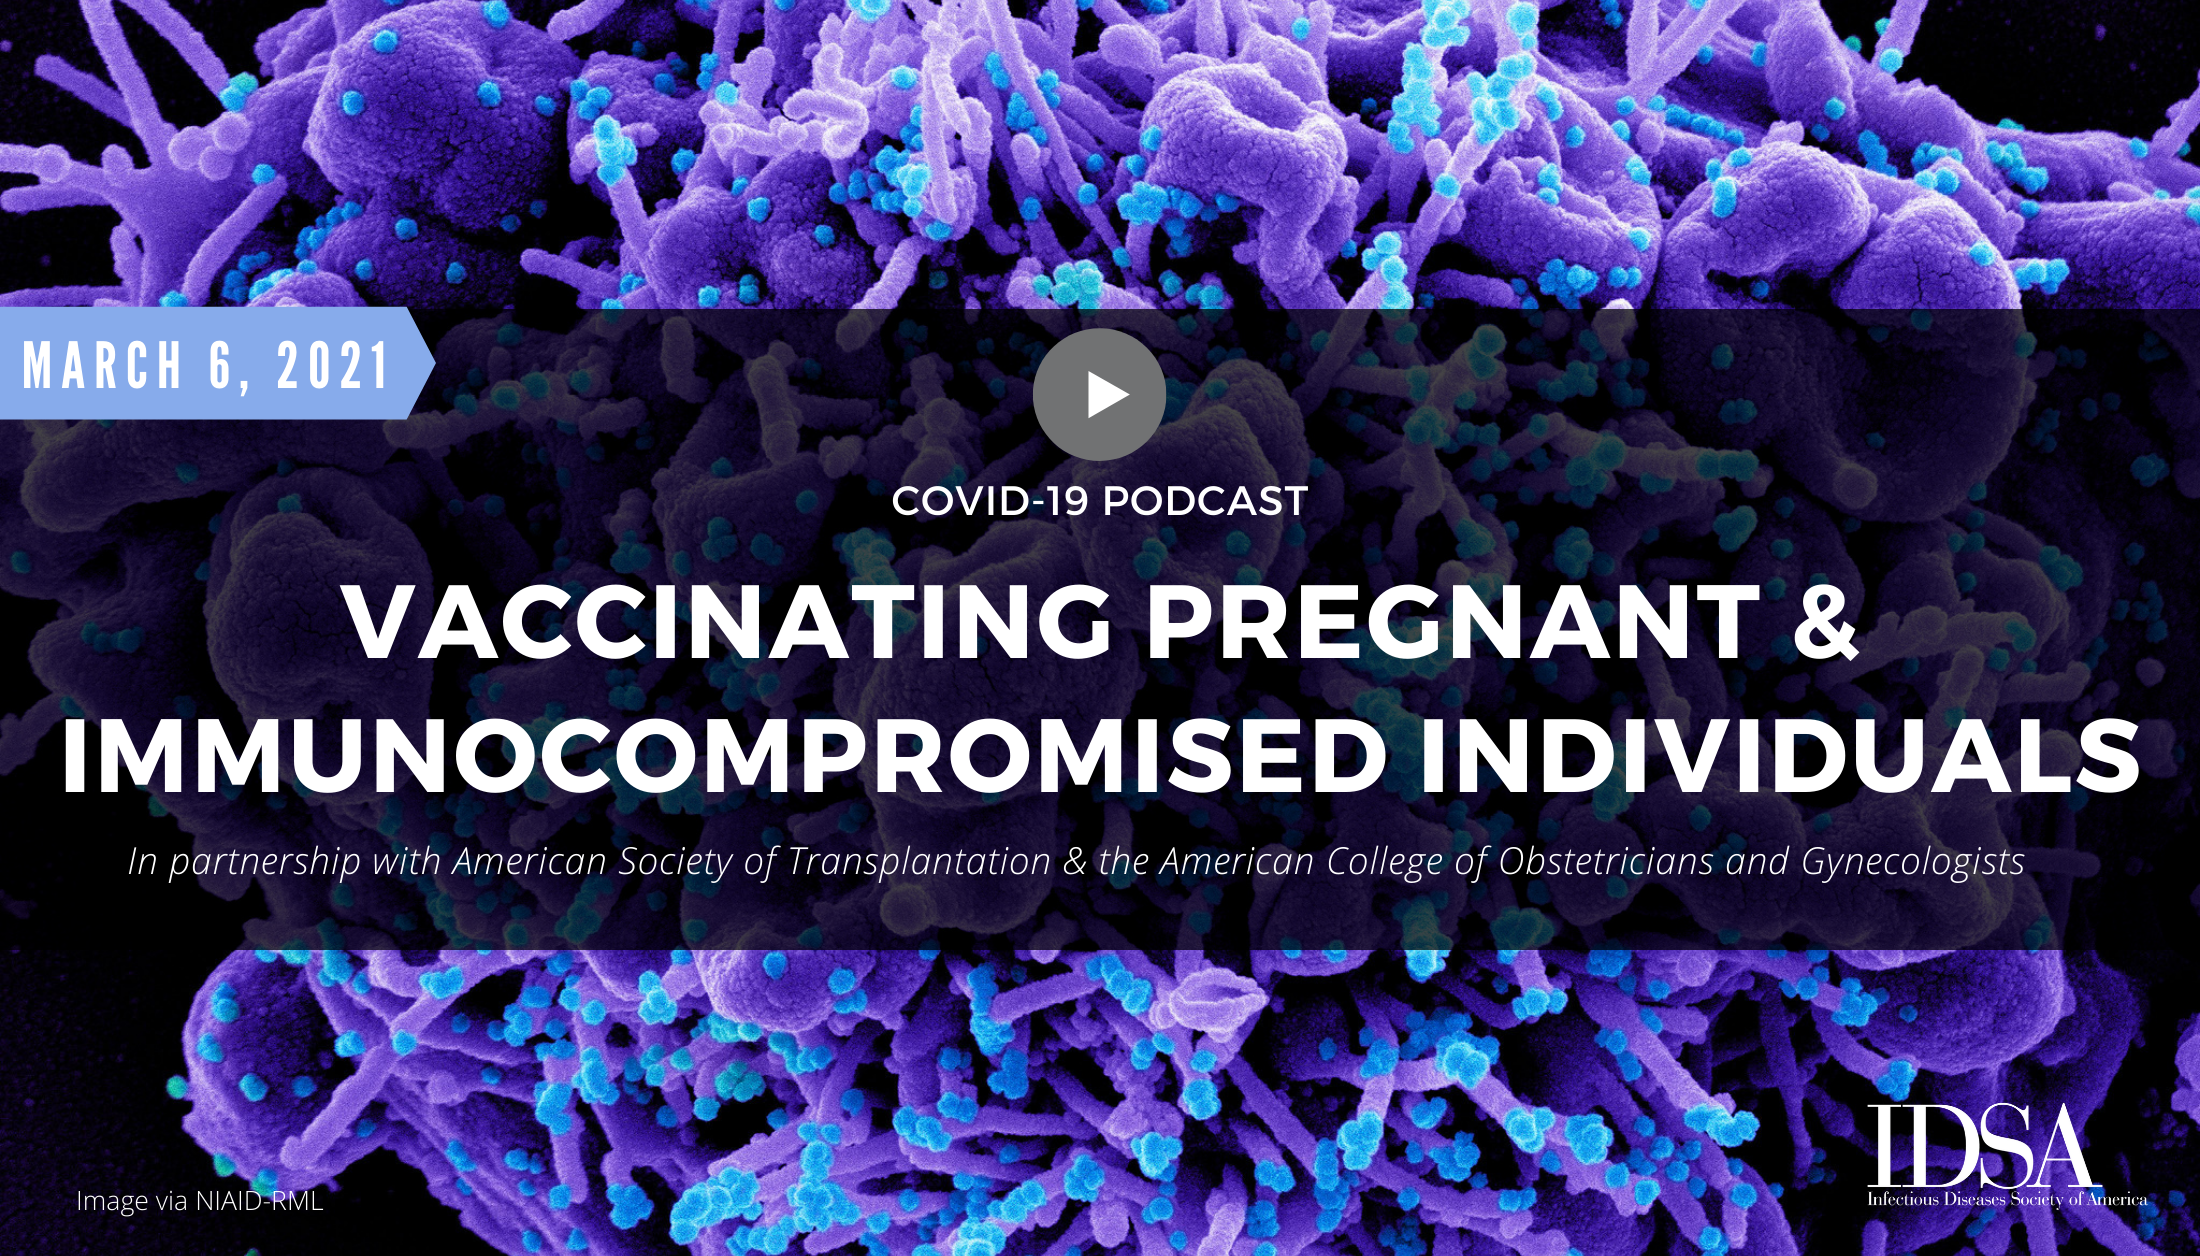 COVID-19 Vaccinating Pregnant and Immunocompromised Individuals